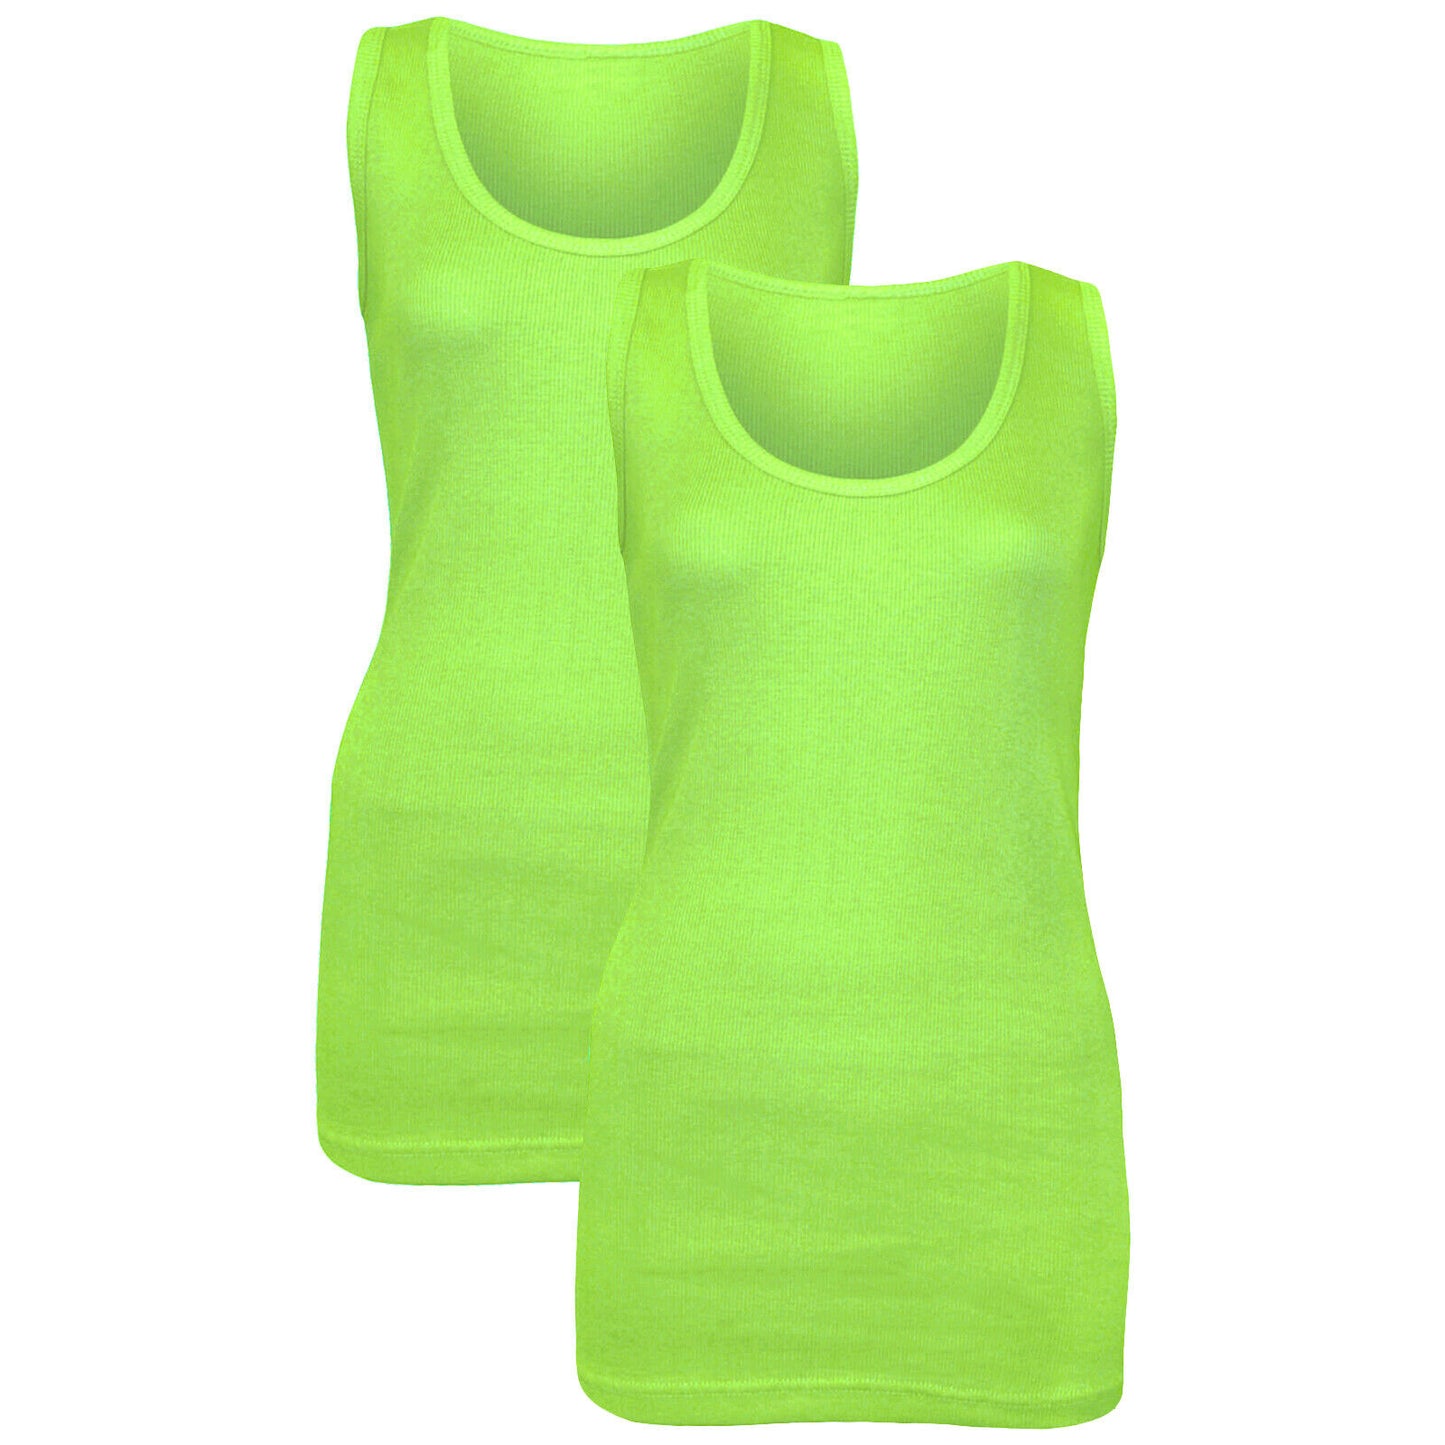 PACK OF 2 NEW WOMEN LADIES CASUAL PLAIN SUMMER STRETCHY RIBBED TOP T SHIRT VEST